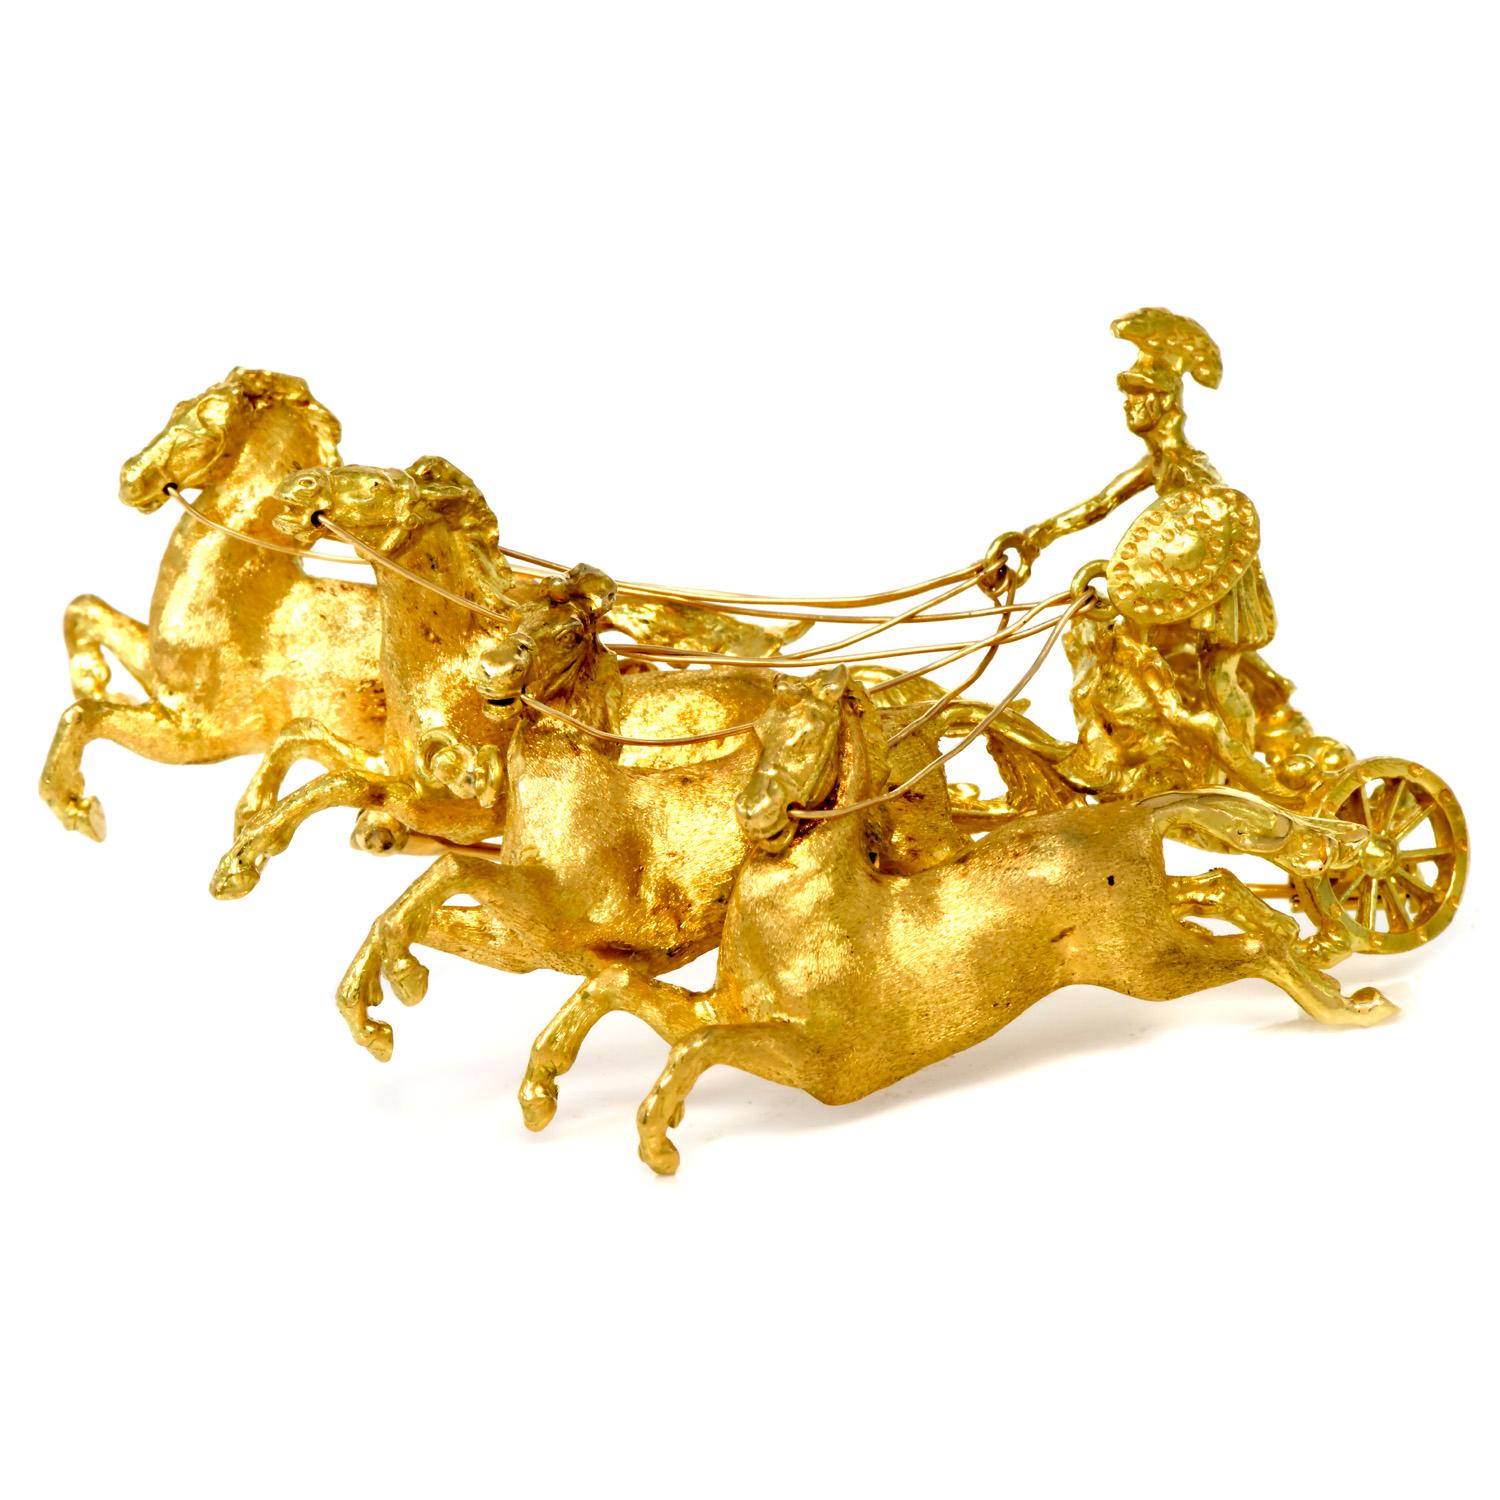 This Solid Heavy 18K Yellow Gold brooch pin is a display of high-quality craftsmanship.

This one of kind handmade Satin Finished horses, and one Roman racing Chariot with a warrior display, its total weight is approx: 52.0 Grams,

This is in